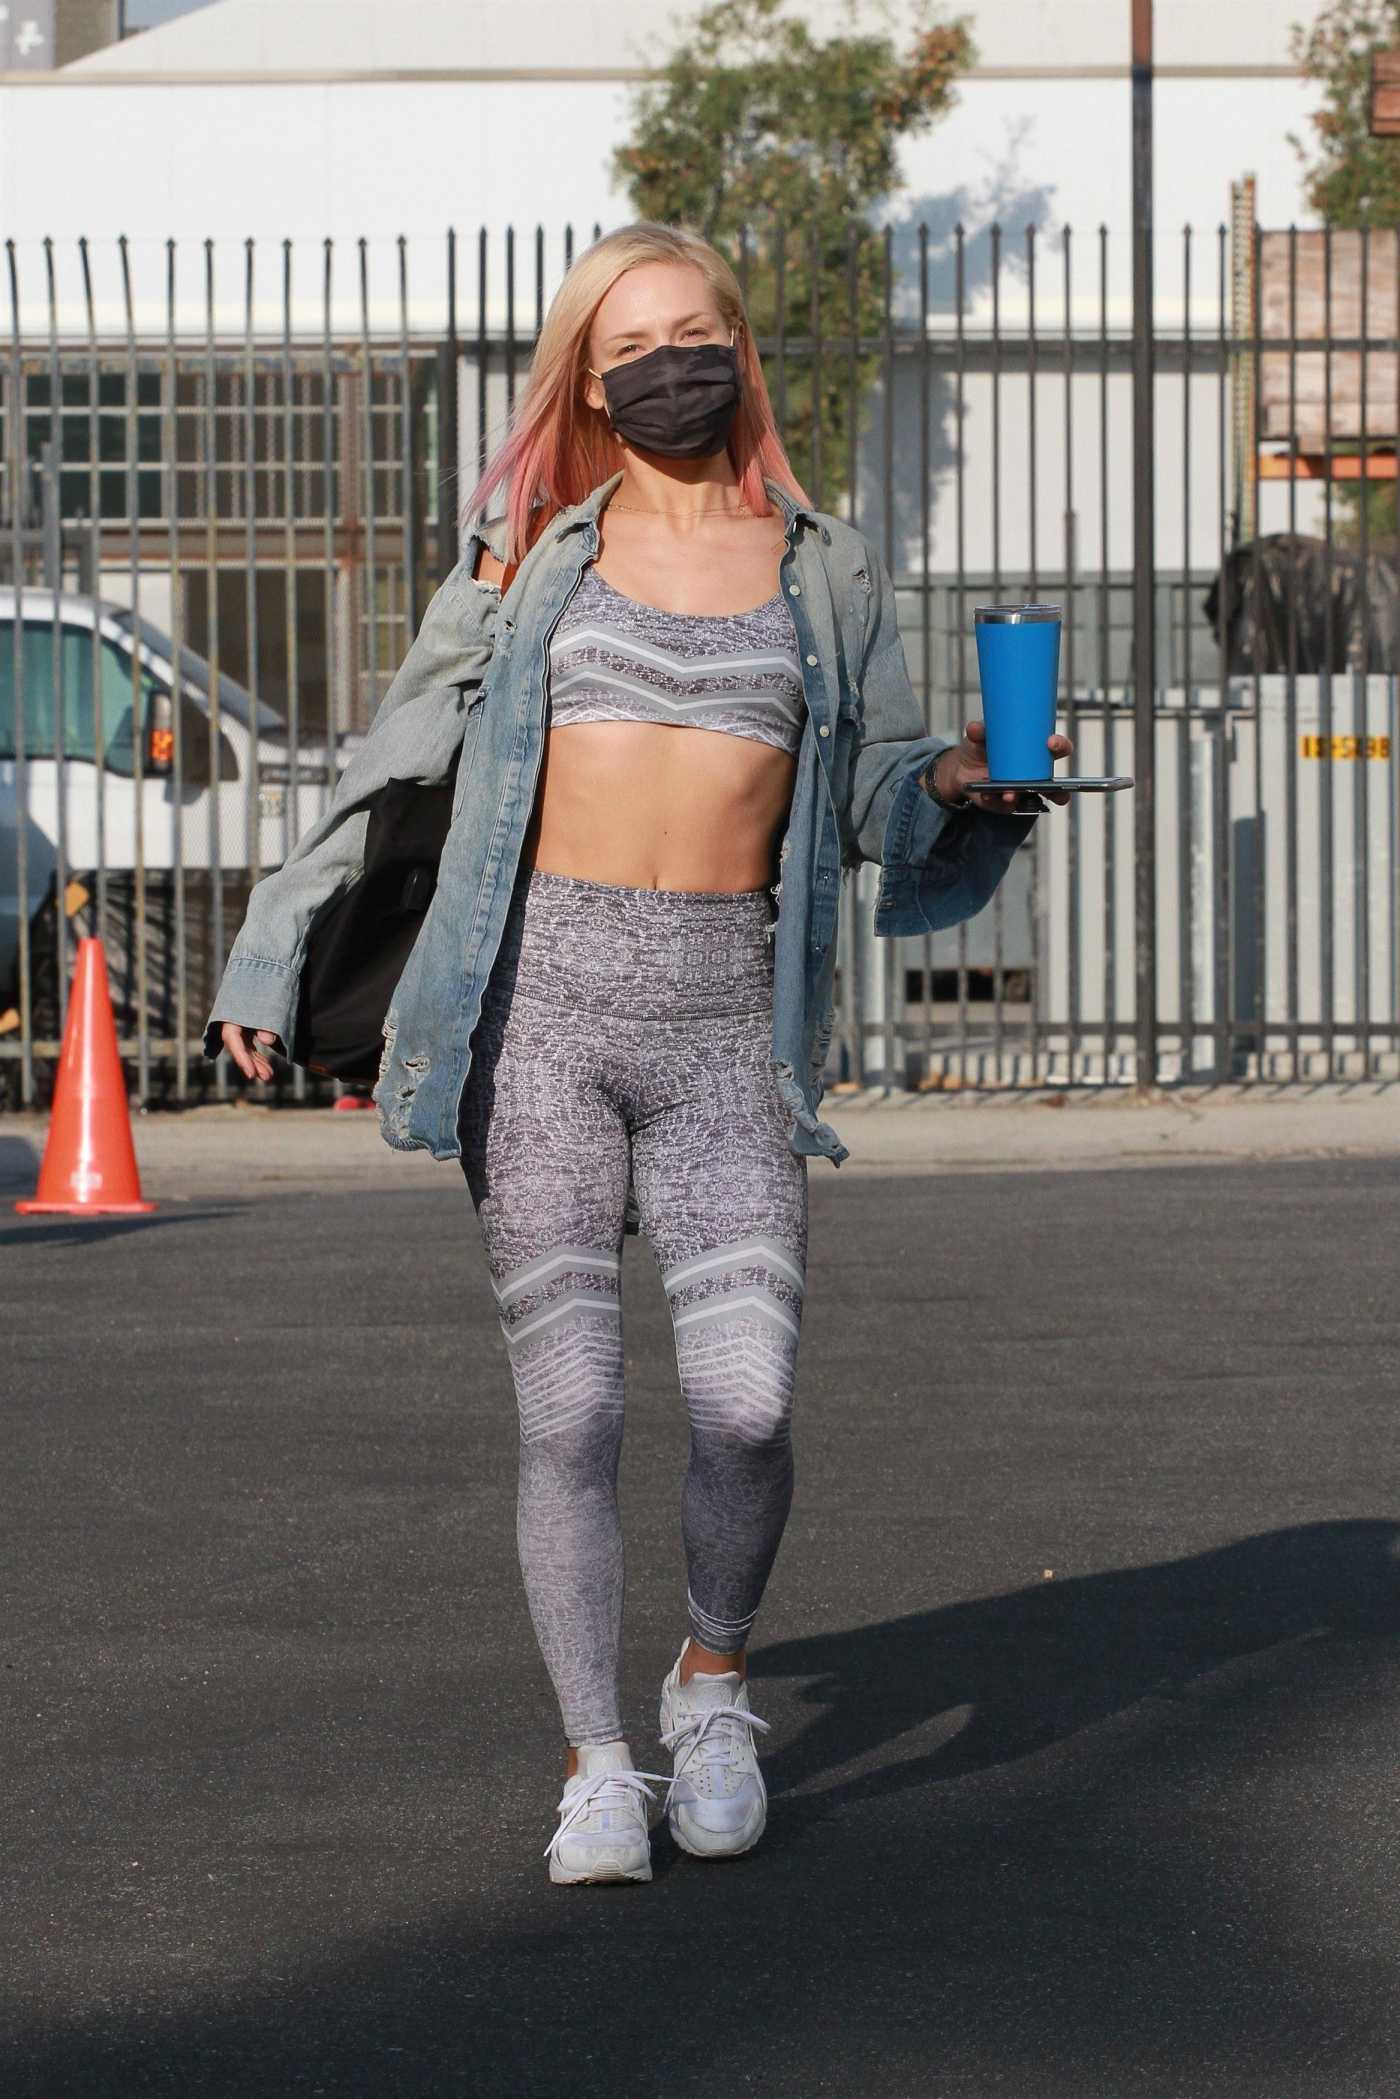 Sharna Burgess in a White Sneakers Leaves the DWTS Studio in Los Angeles 09/18/2020